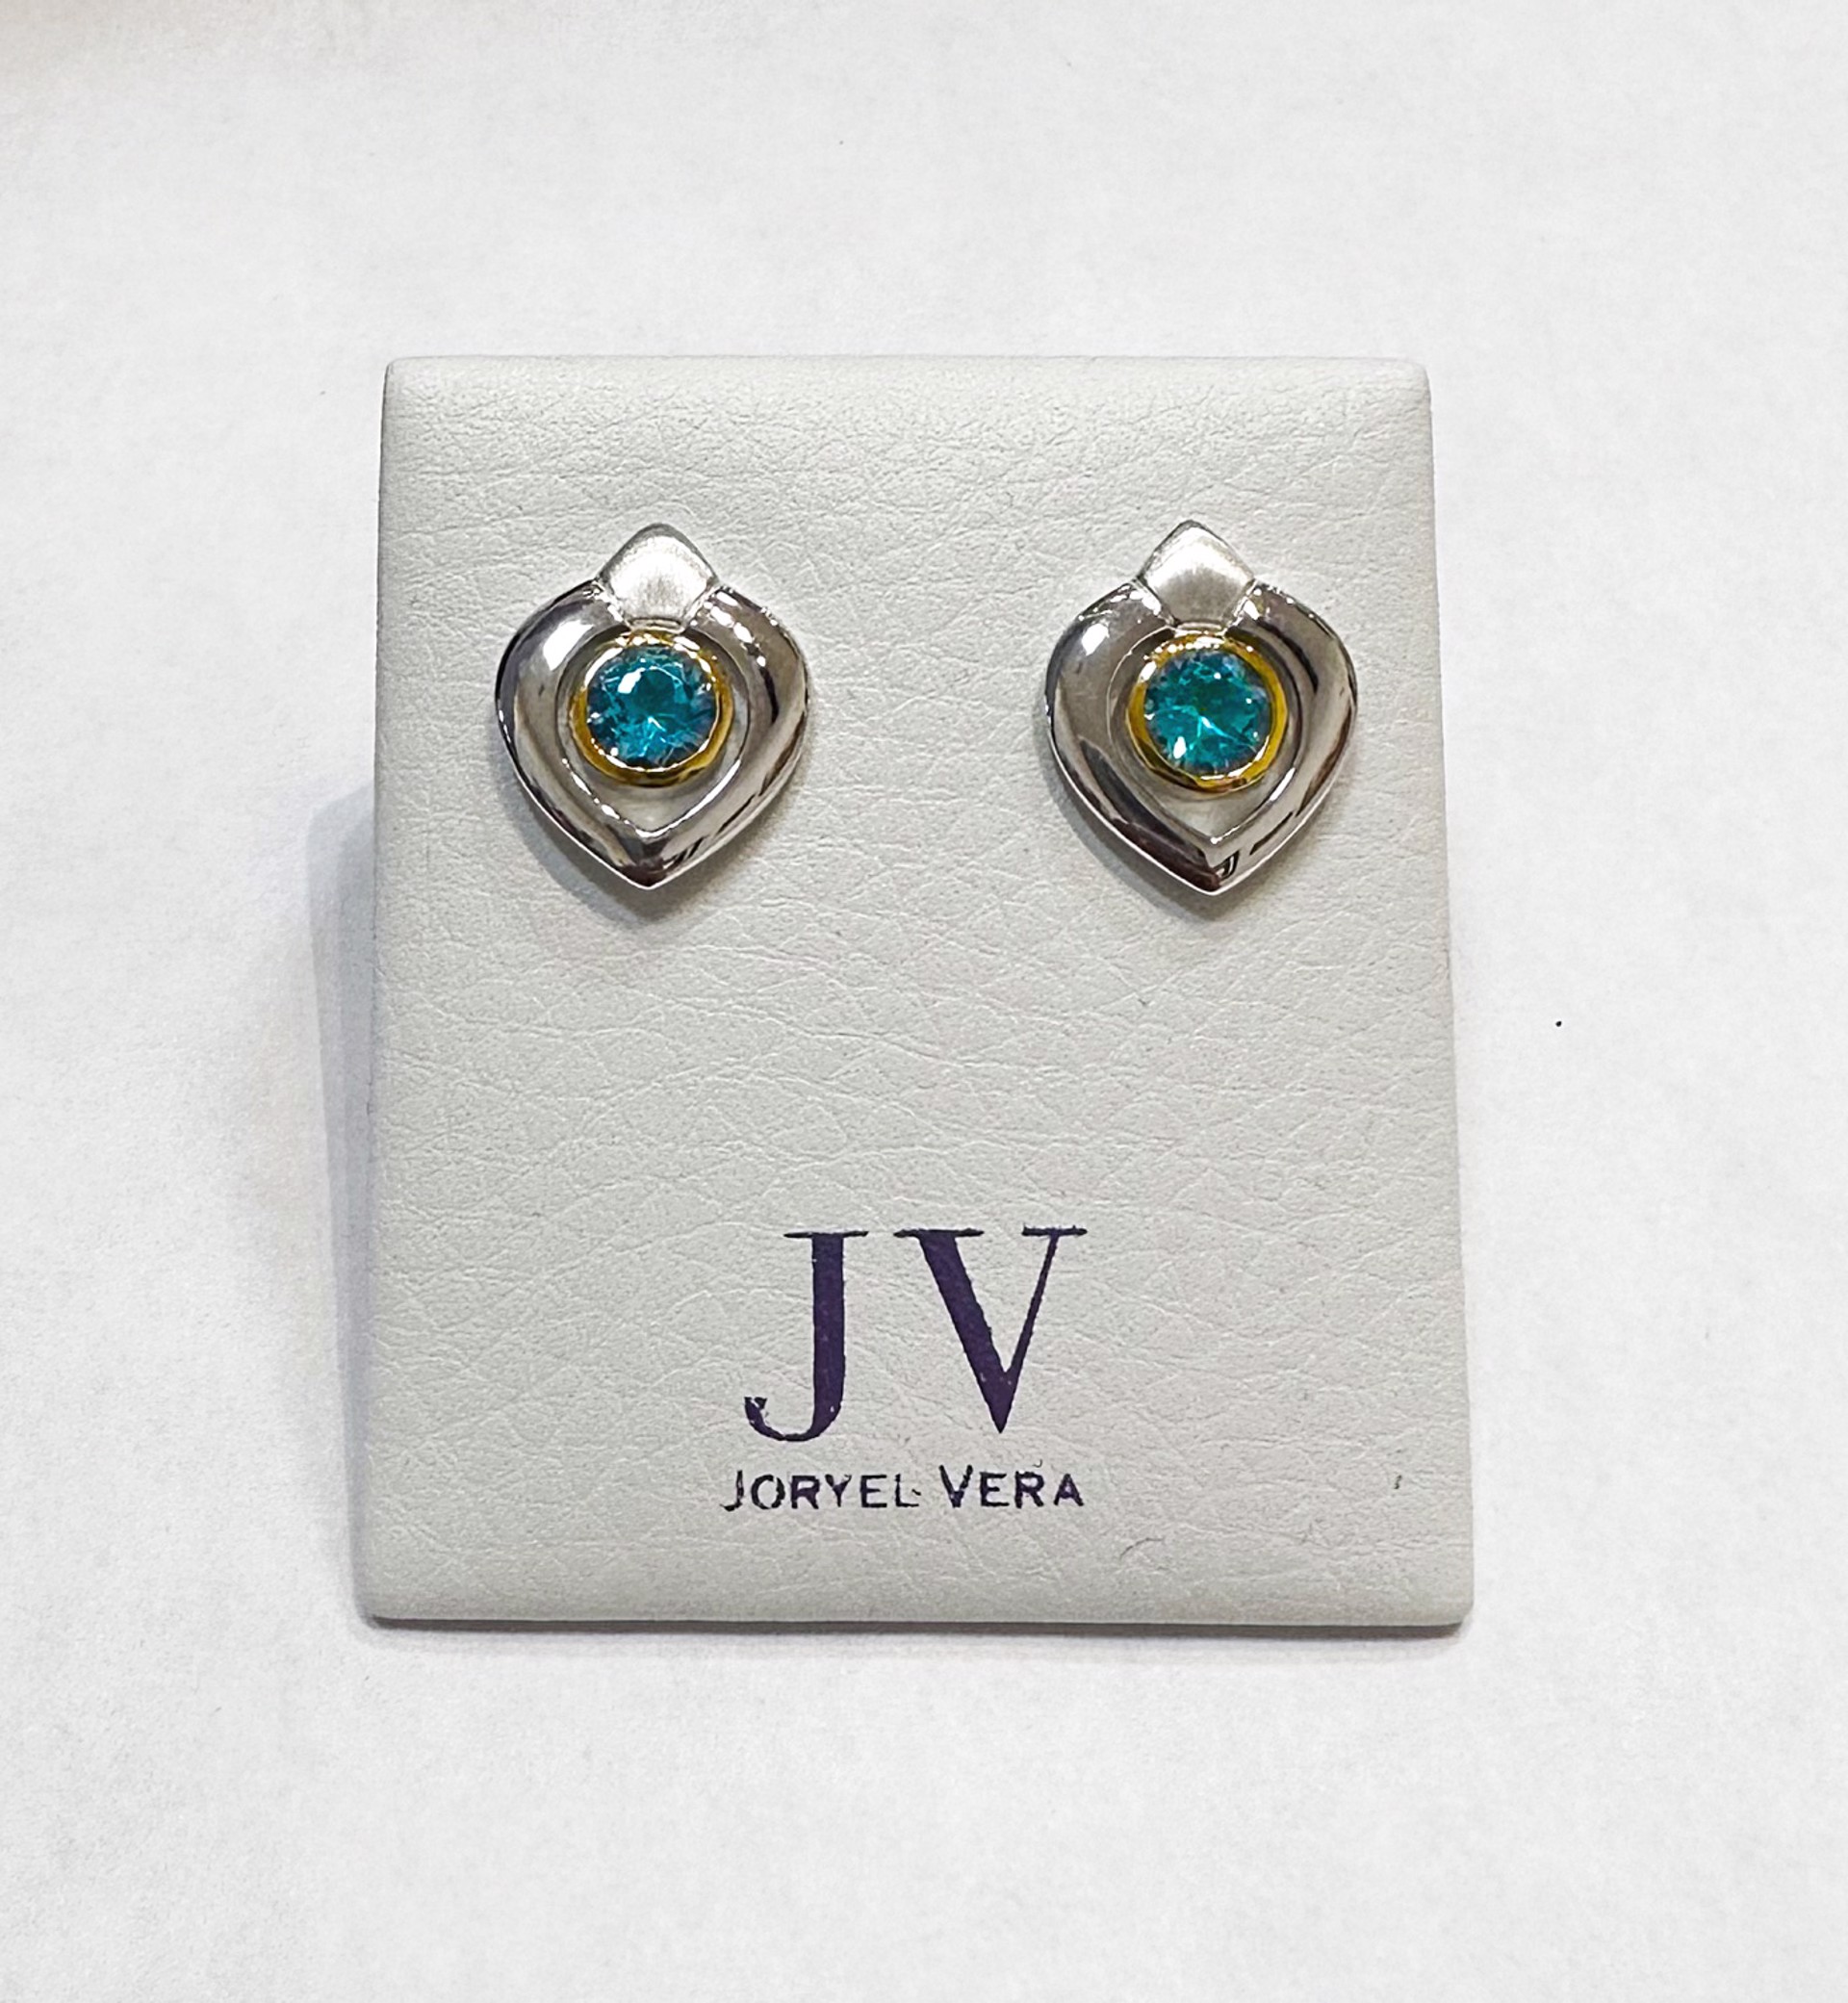 Earrings - Blue Topaz with 14kt Surround Set in Sterling Silver by Joryel Vera